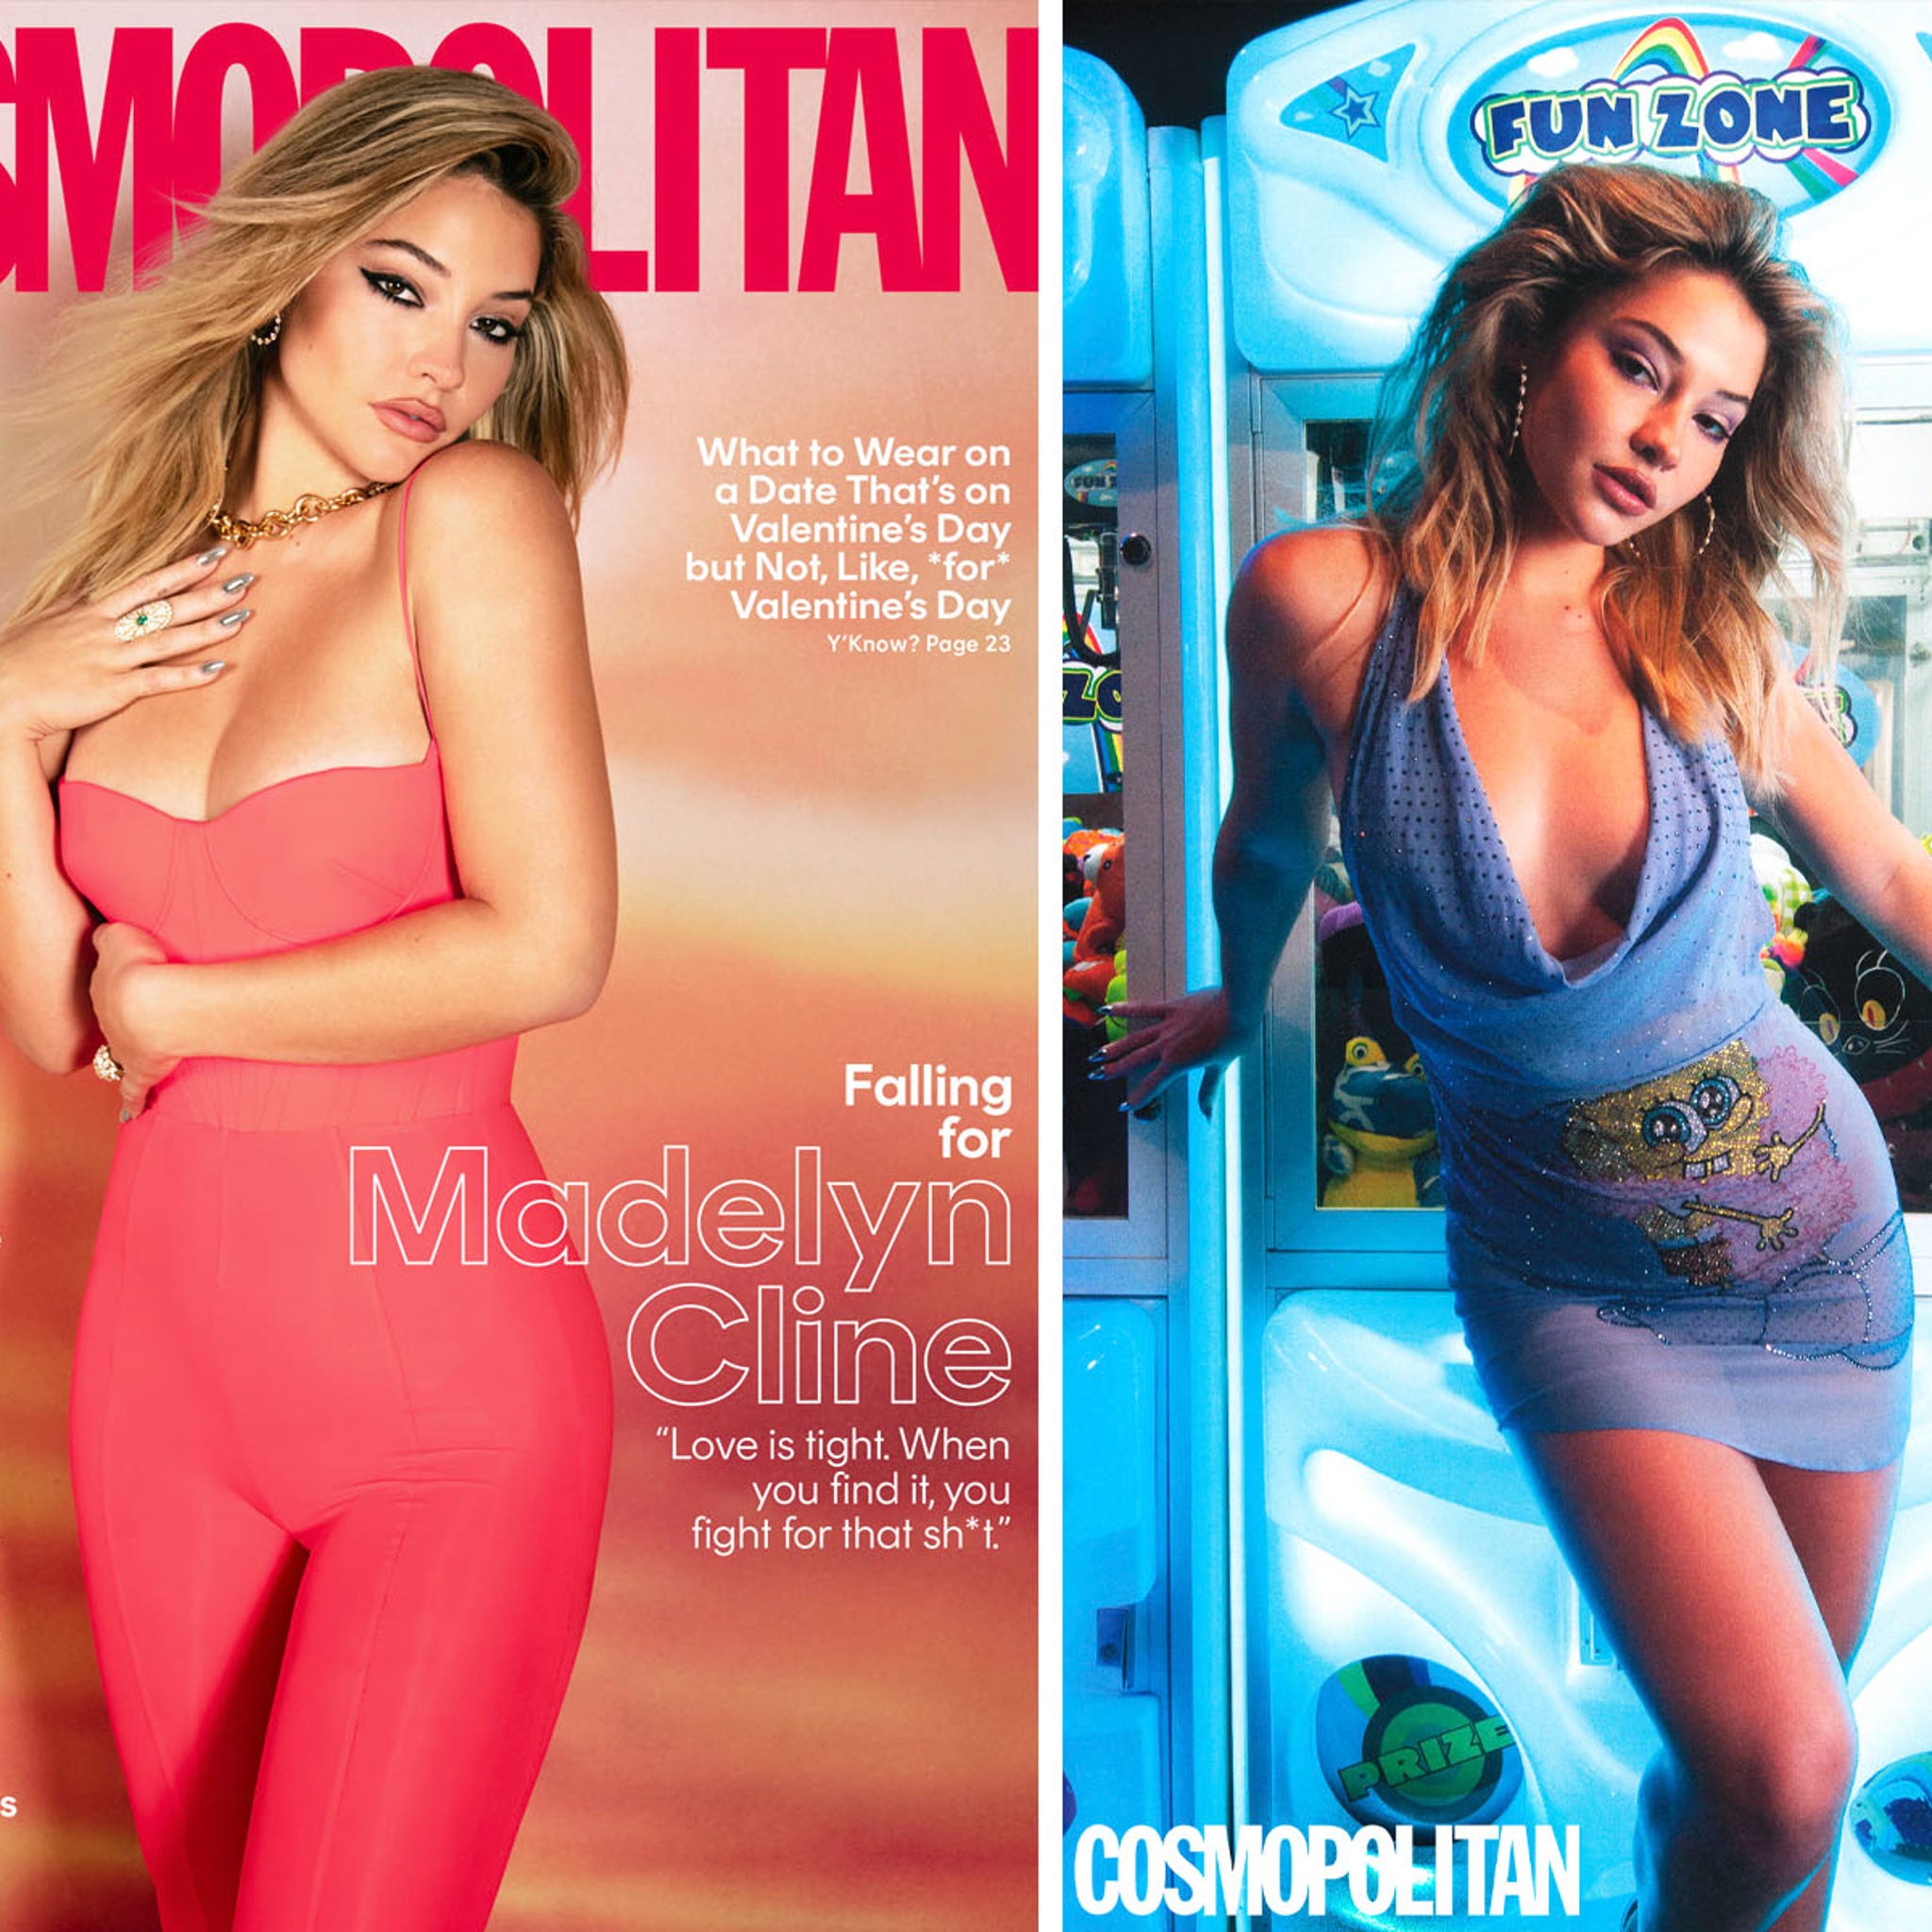 Madelyn Cline featured in Cosmopolitan cover